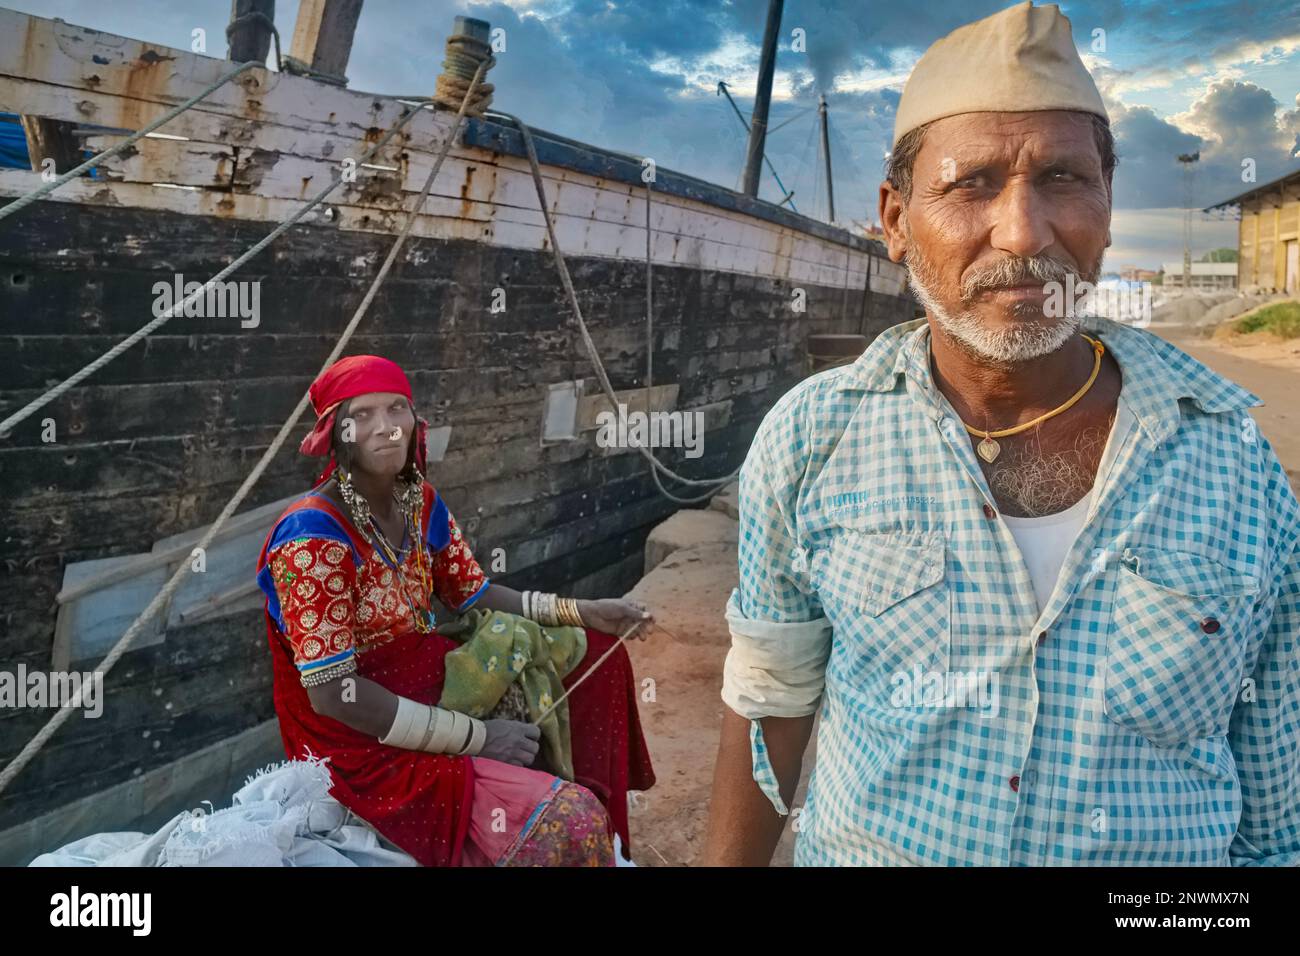 Portrait of an Indian man in the Old Port of Mangalore, Karnataka, India, a colorfully dressed woman from the Lambari (Lambadi) tribe sitting nearby Stock Photo